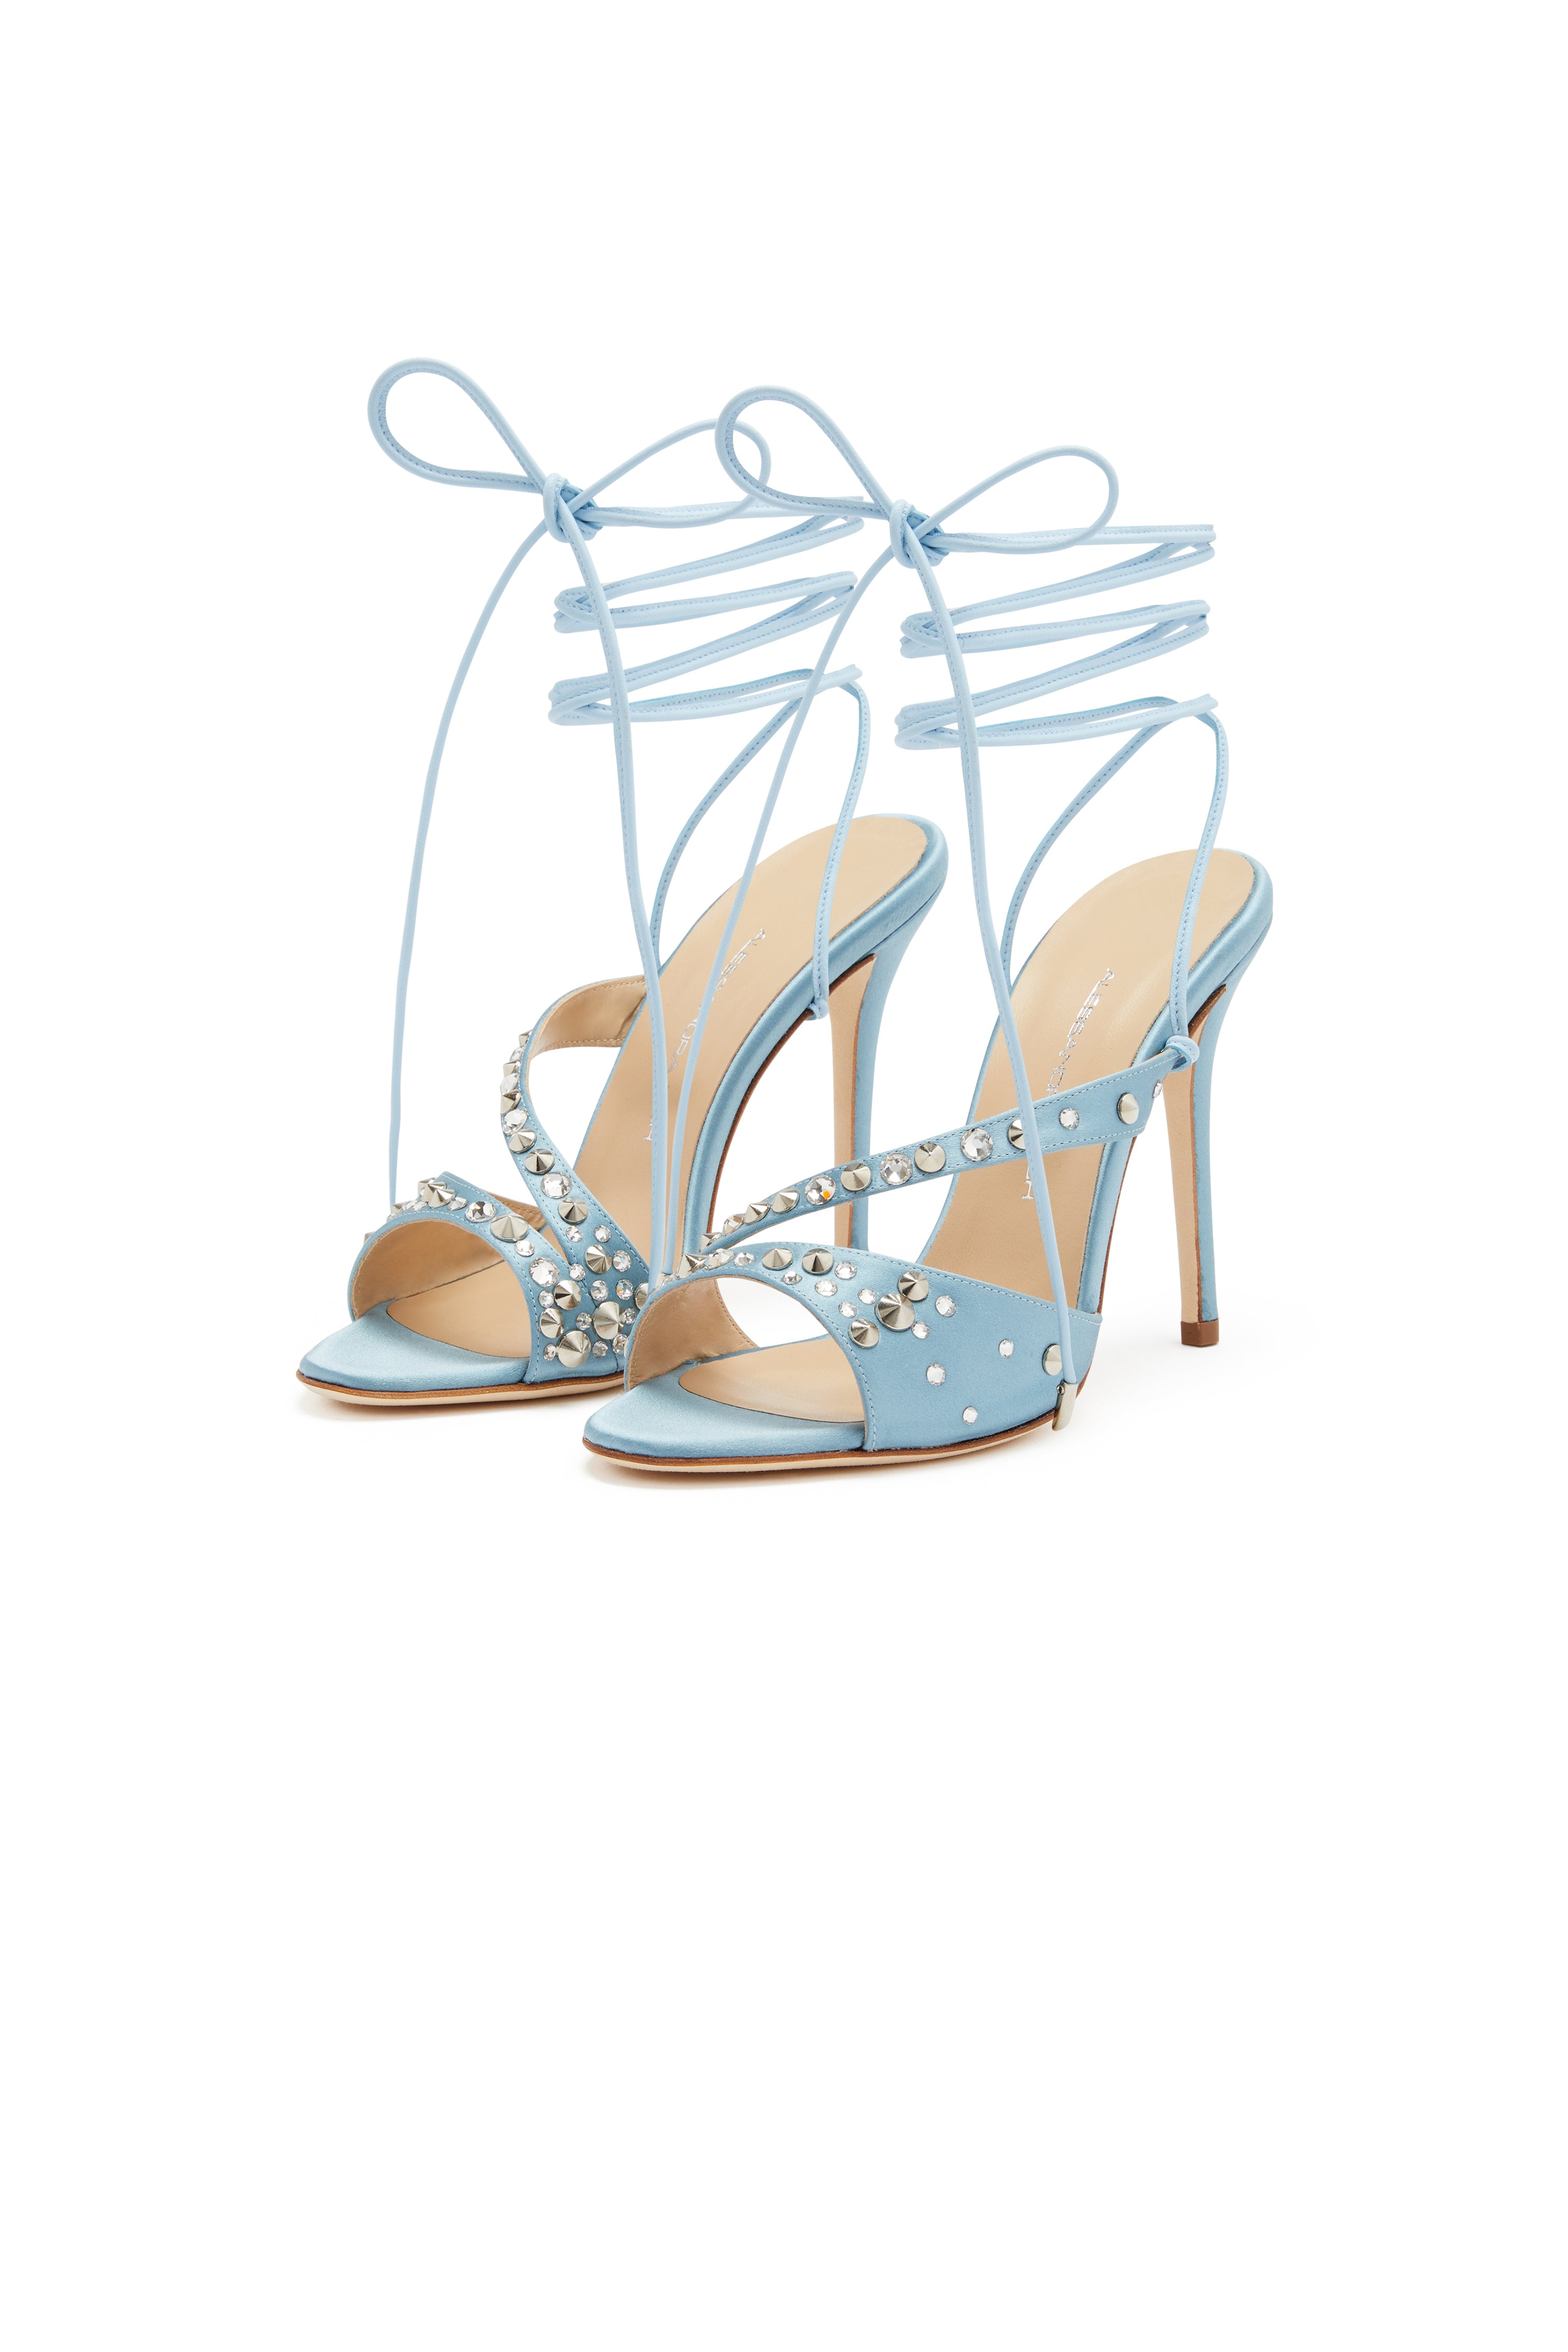 SILK SATIN SANDALS WITH LACES AND CRYSTALS - 10CM – Alessandra Rich